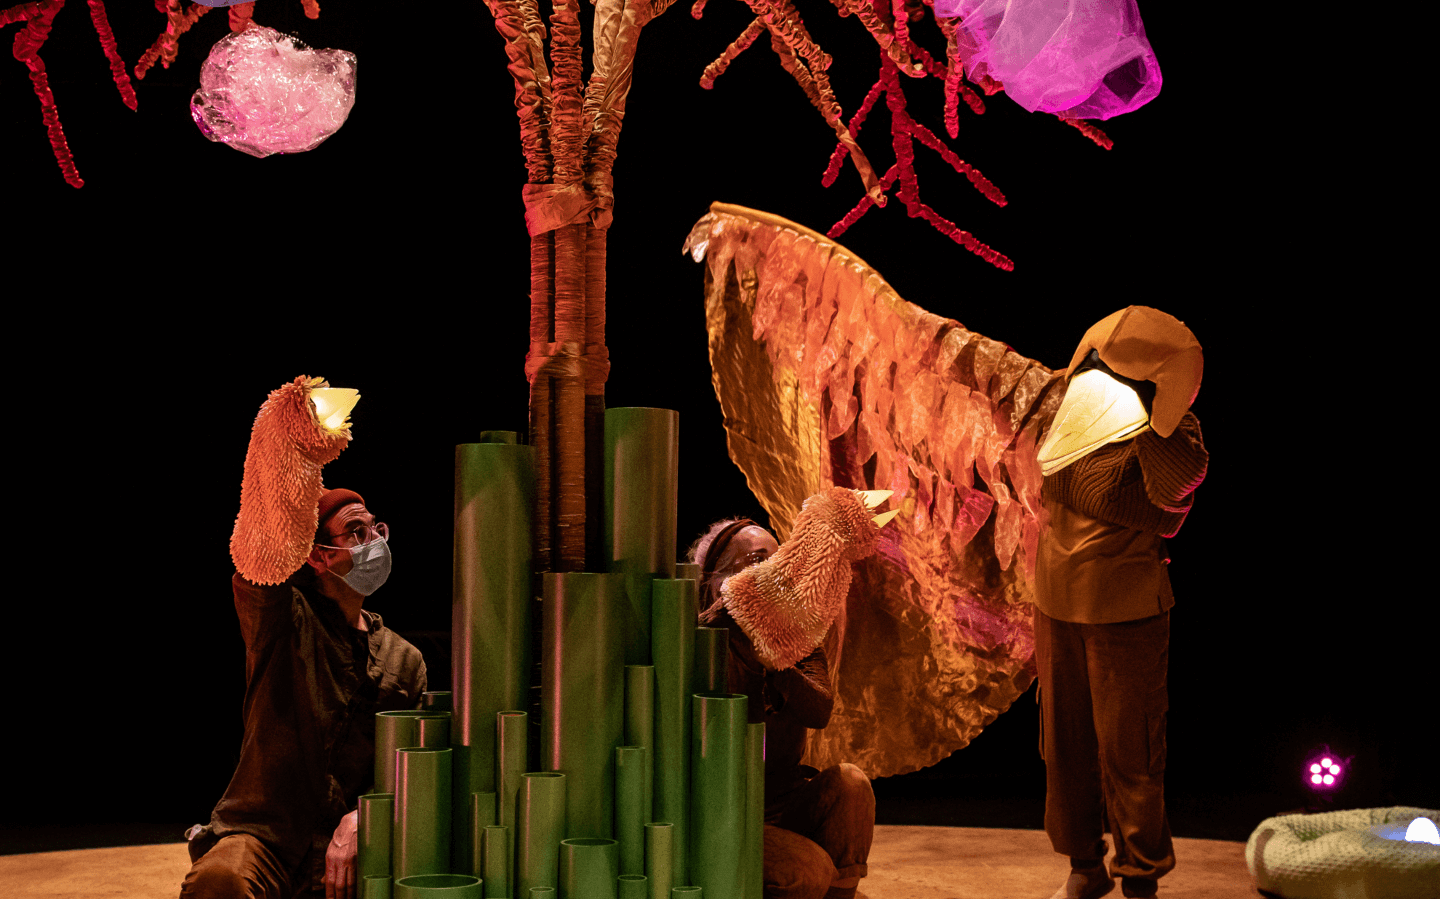 3 actors gather on stage with puppets under an artistic tree softly lit. The puppets are brown birds with their beaks lit up. One of the birds is larger and is extending a wing towards the two smaller birds.